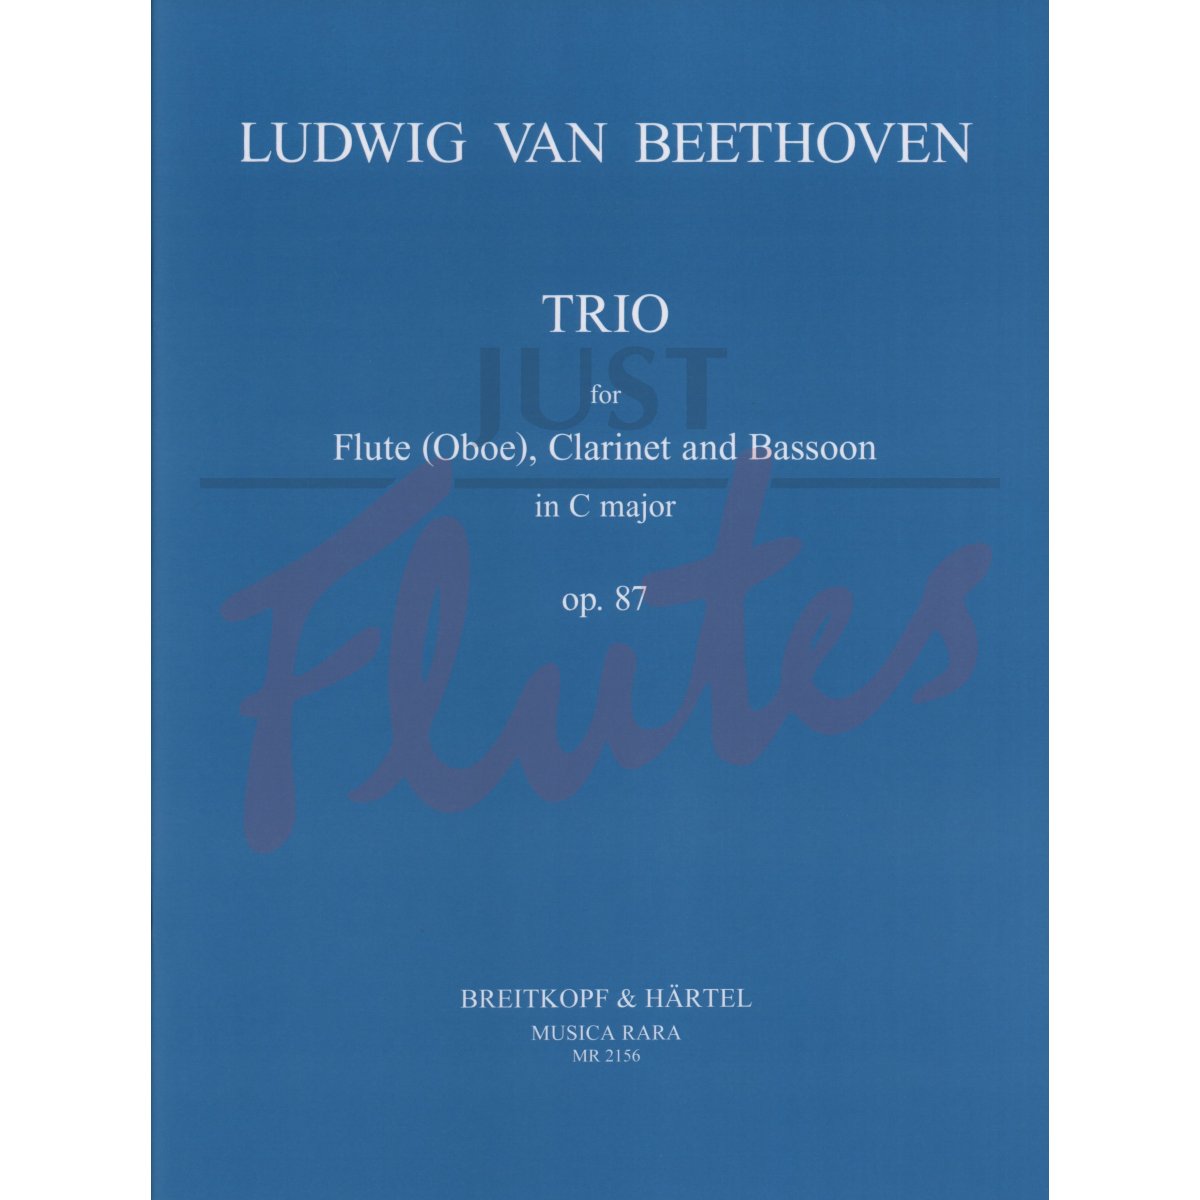 Trio in C major for Flute, Clarinet and Bassoon